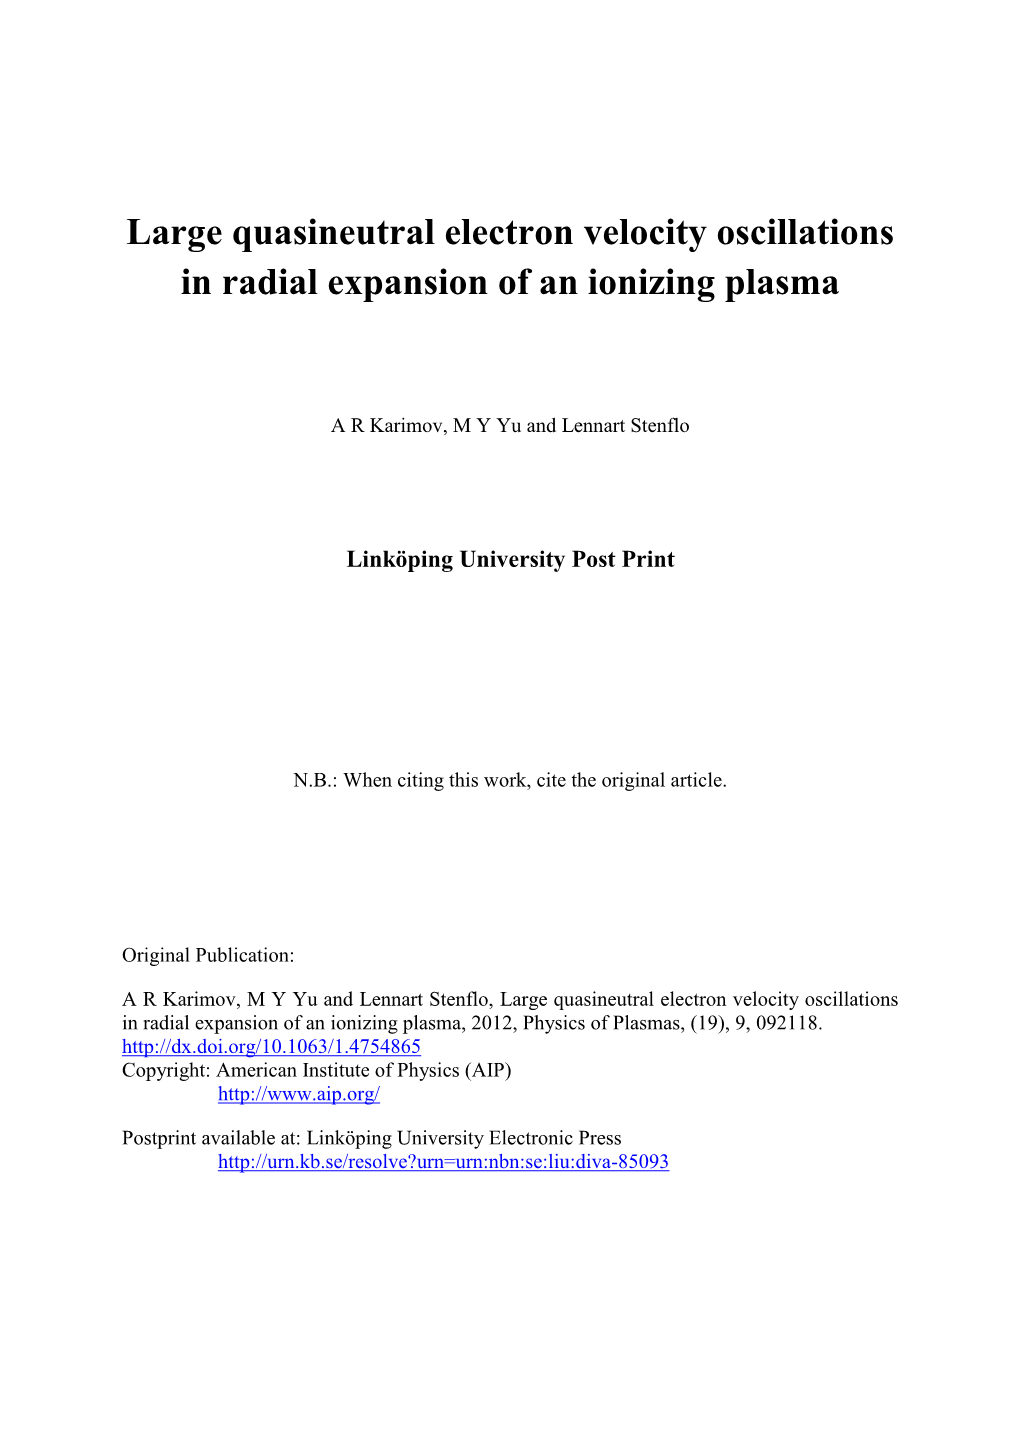 Large Quasineutral Electron Velocity Oscillations in Radial Expansion of an Ionizing Plasma